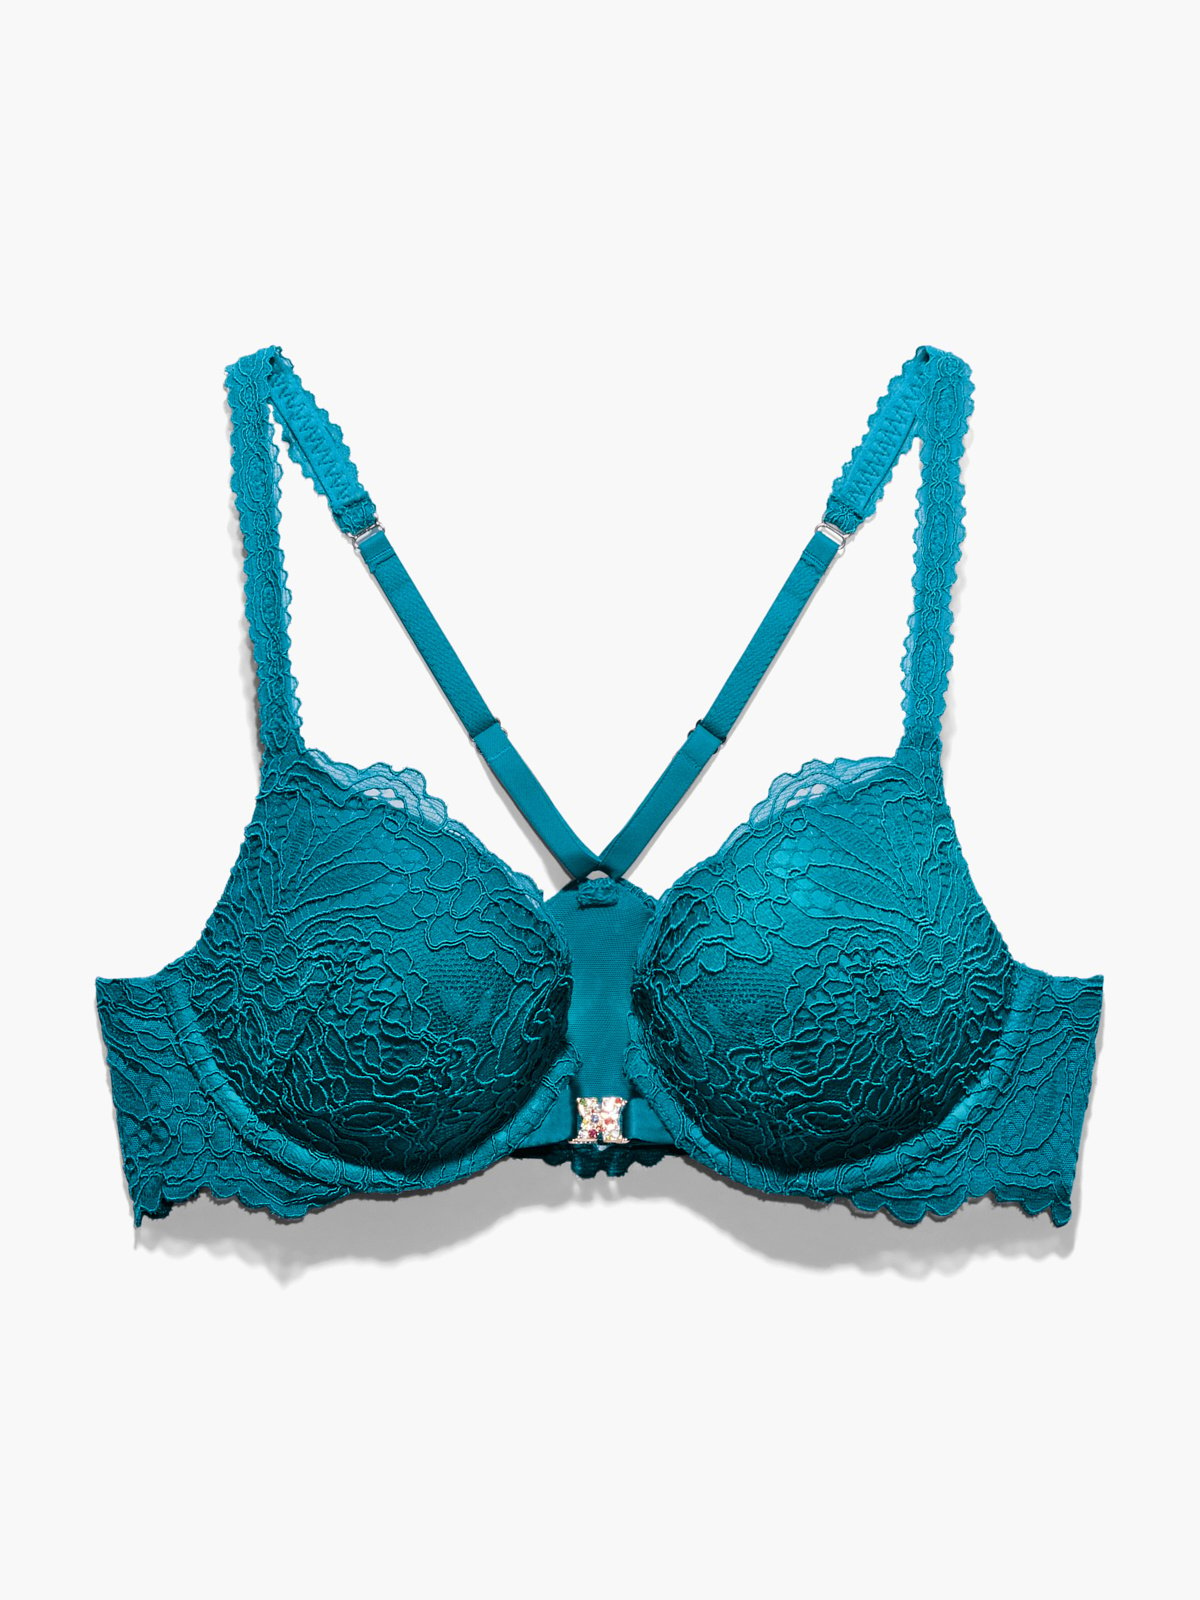 TALENT Front Closure Bras Lace Underwear Bralette Breathable Push Up  Brassiere Without Underwire(Blue,34a) 